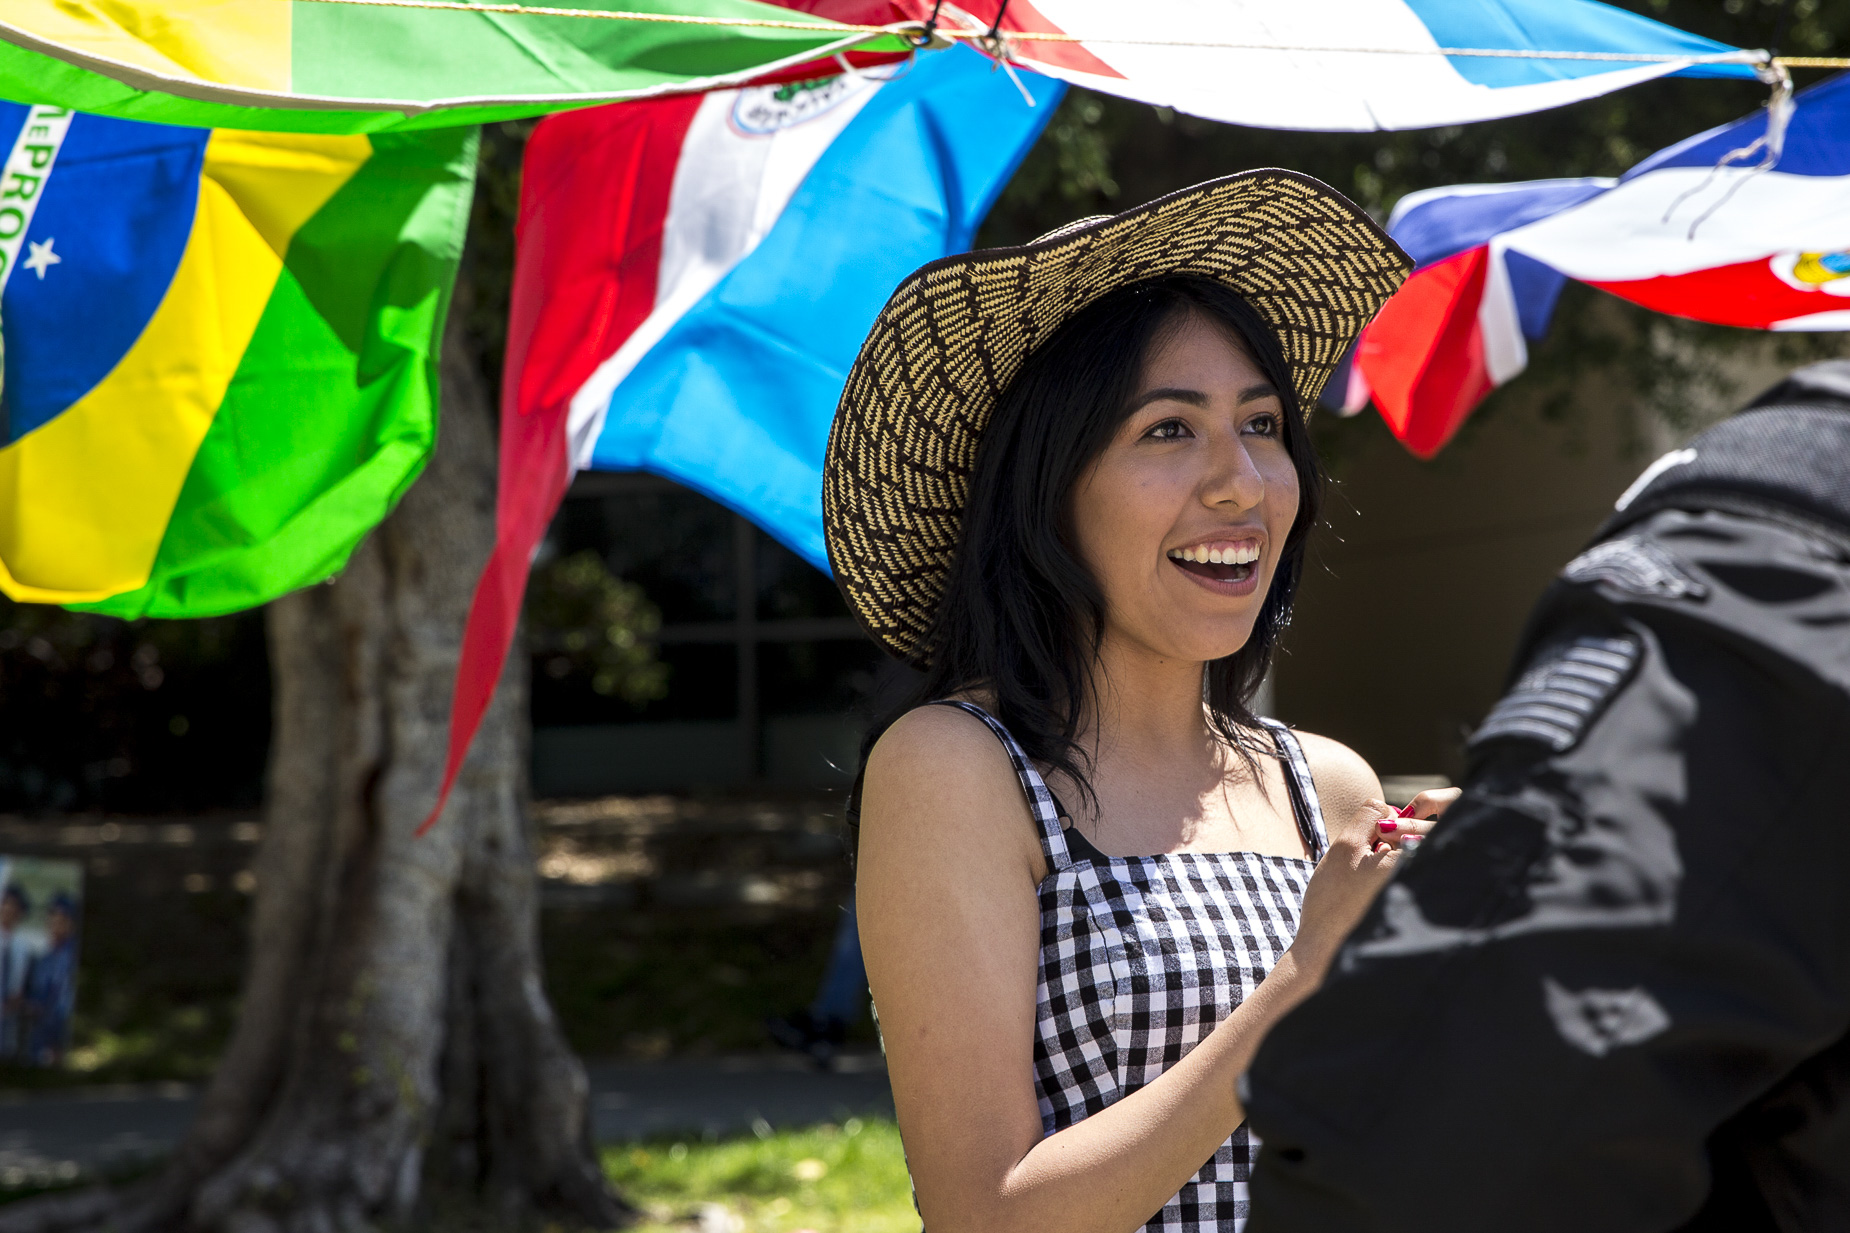  Santa Monica College (SMC) student and “Adelante” Club member Lesley Calvo interacts with students passing by the Cinco De Mayo celebration event that took place in front of the clock tower on the SMC main campus in Santa Monica California on Thursd